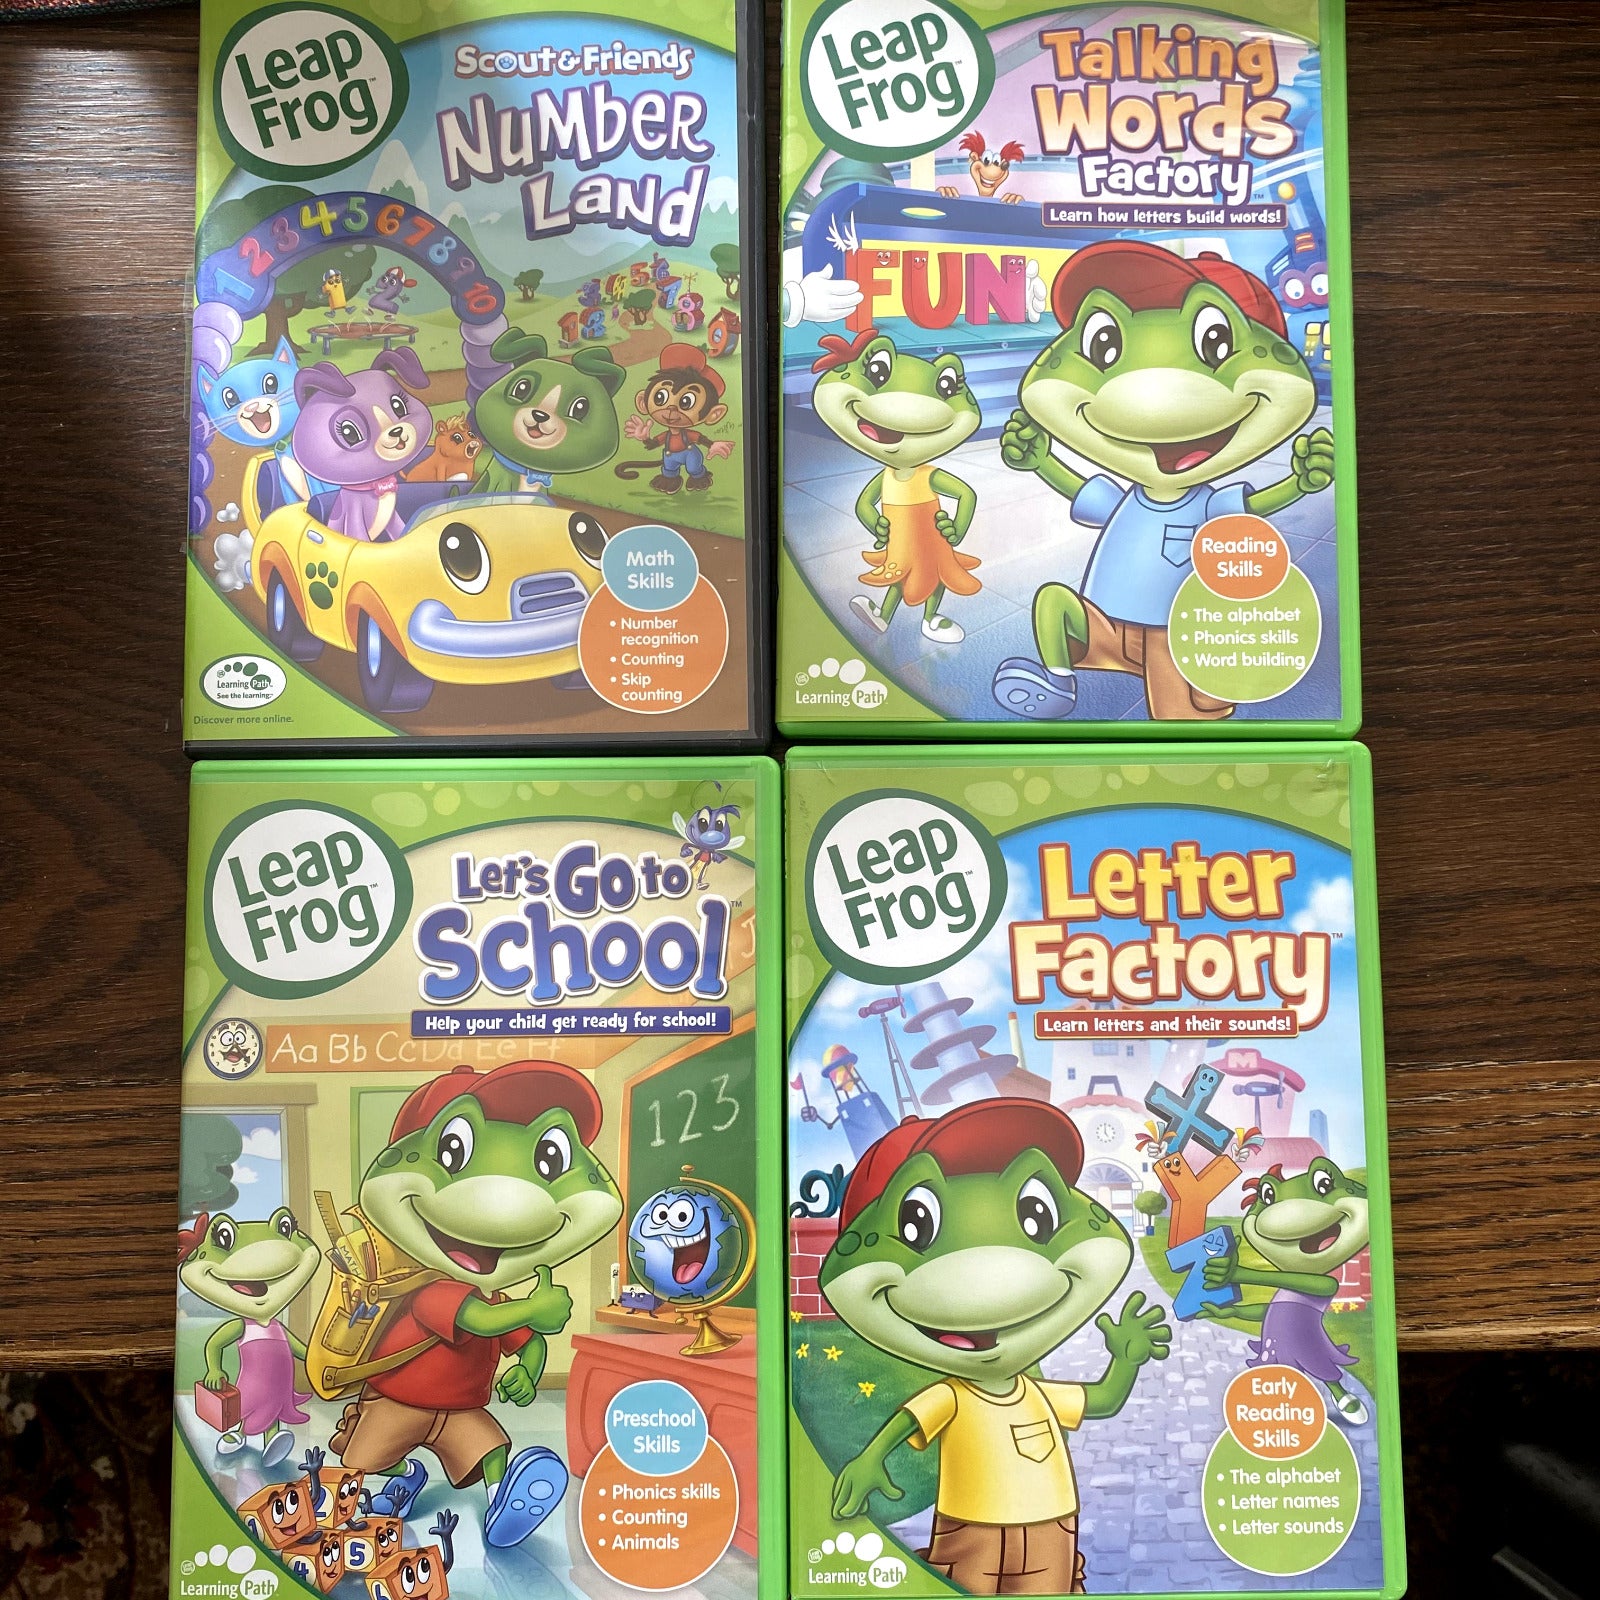 LOT of 4: Leap Frog: Number Land/Talking Words/Letters/Let's Go to School